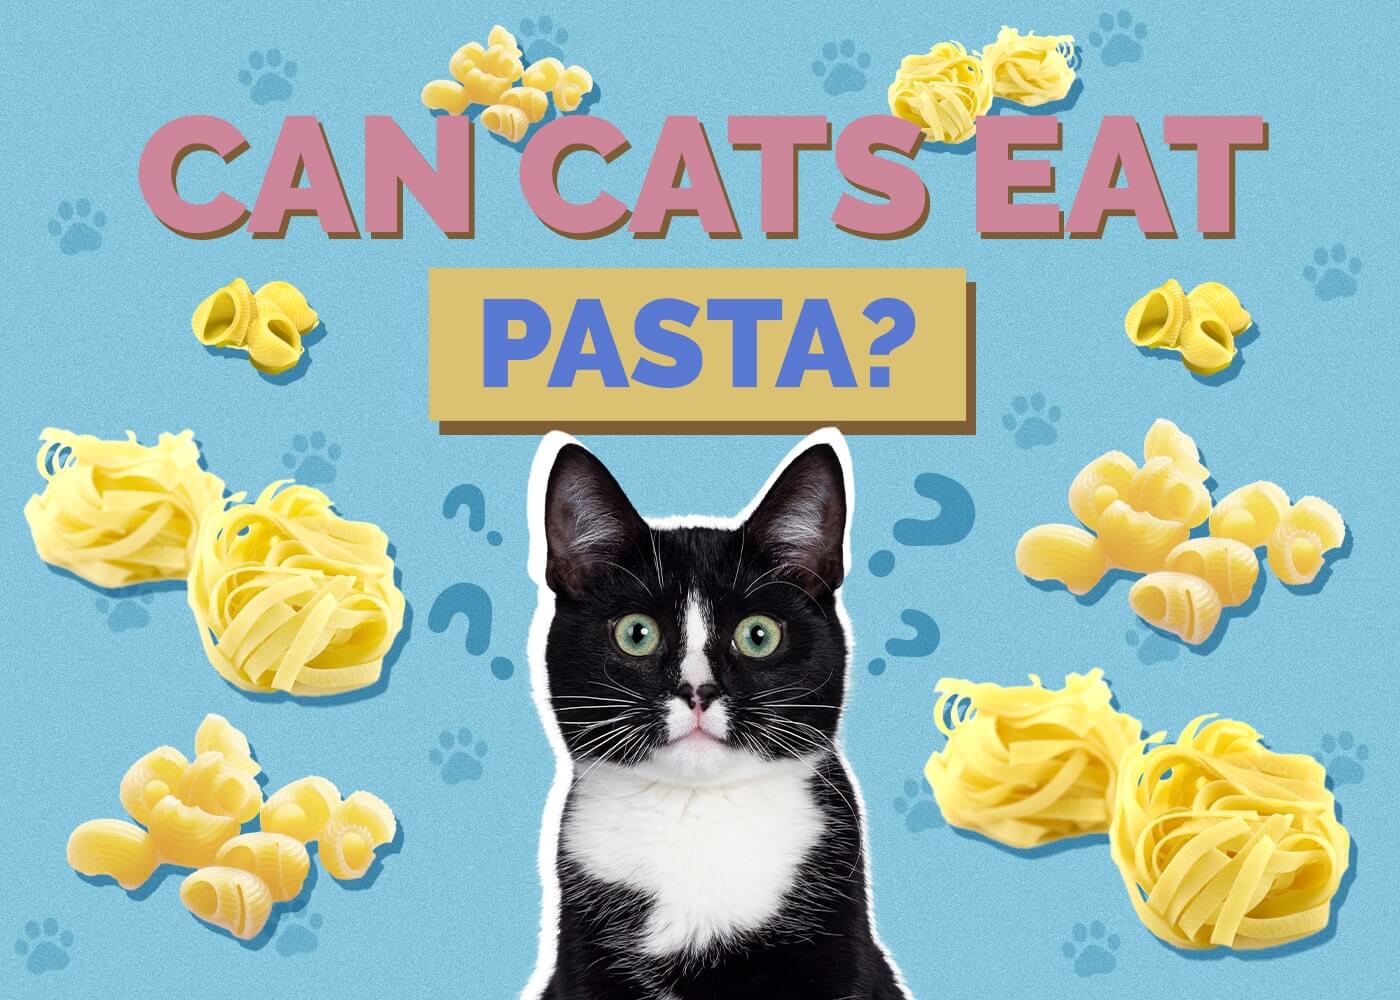 Can Cats Eat Alfredo Pasta